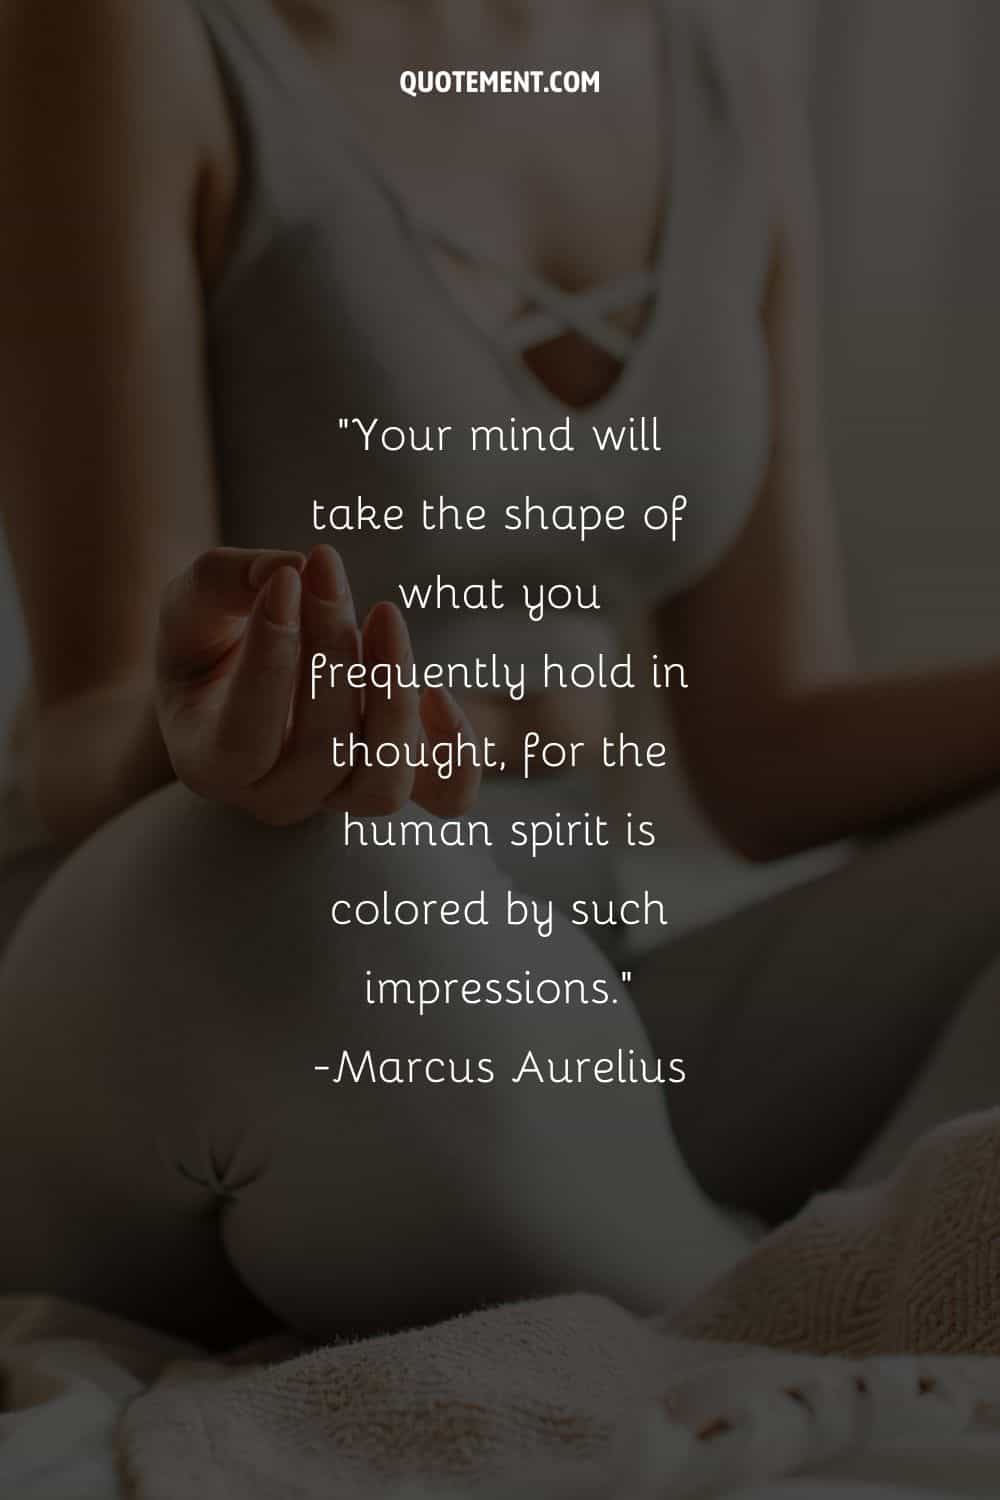 Your mind will take the shape of what you frequently hold in thought, for the human spirit is colored by such impressions